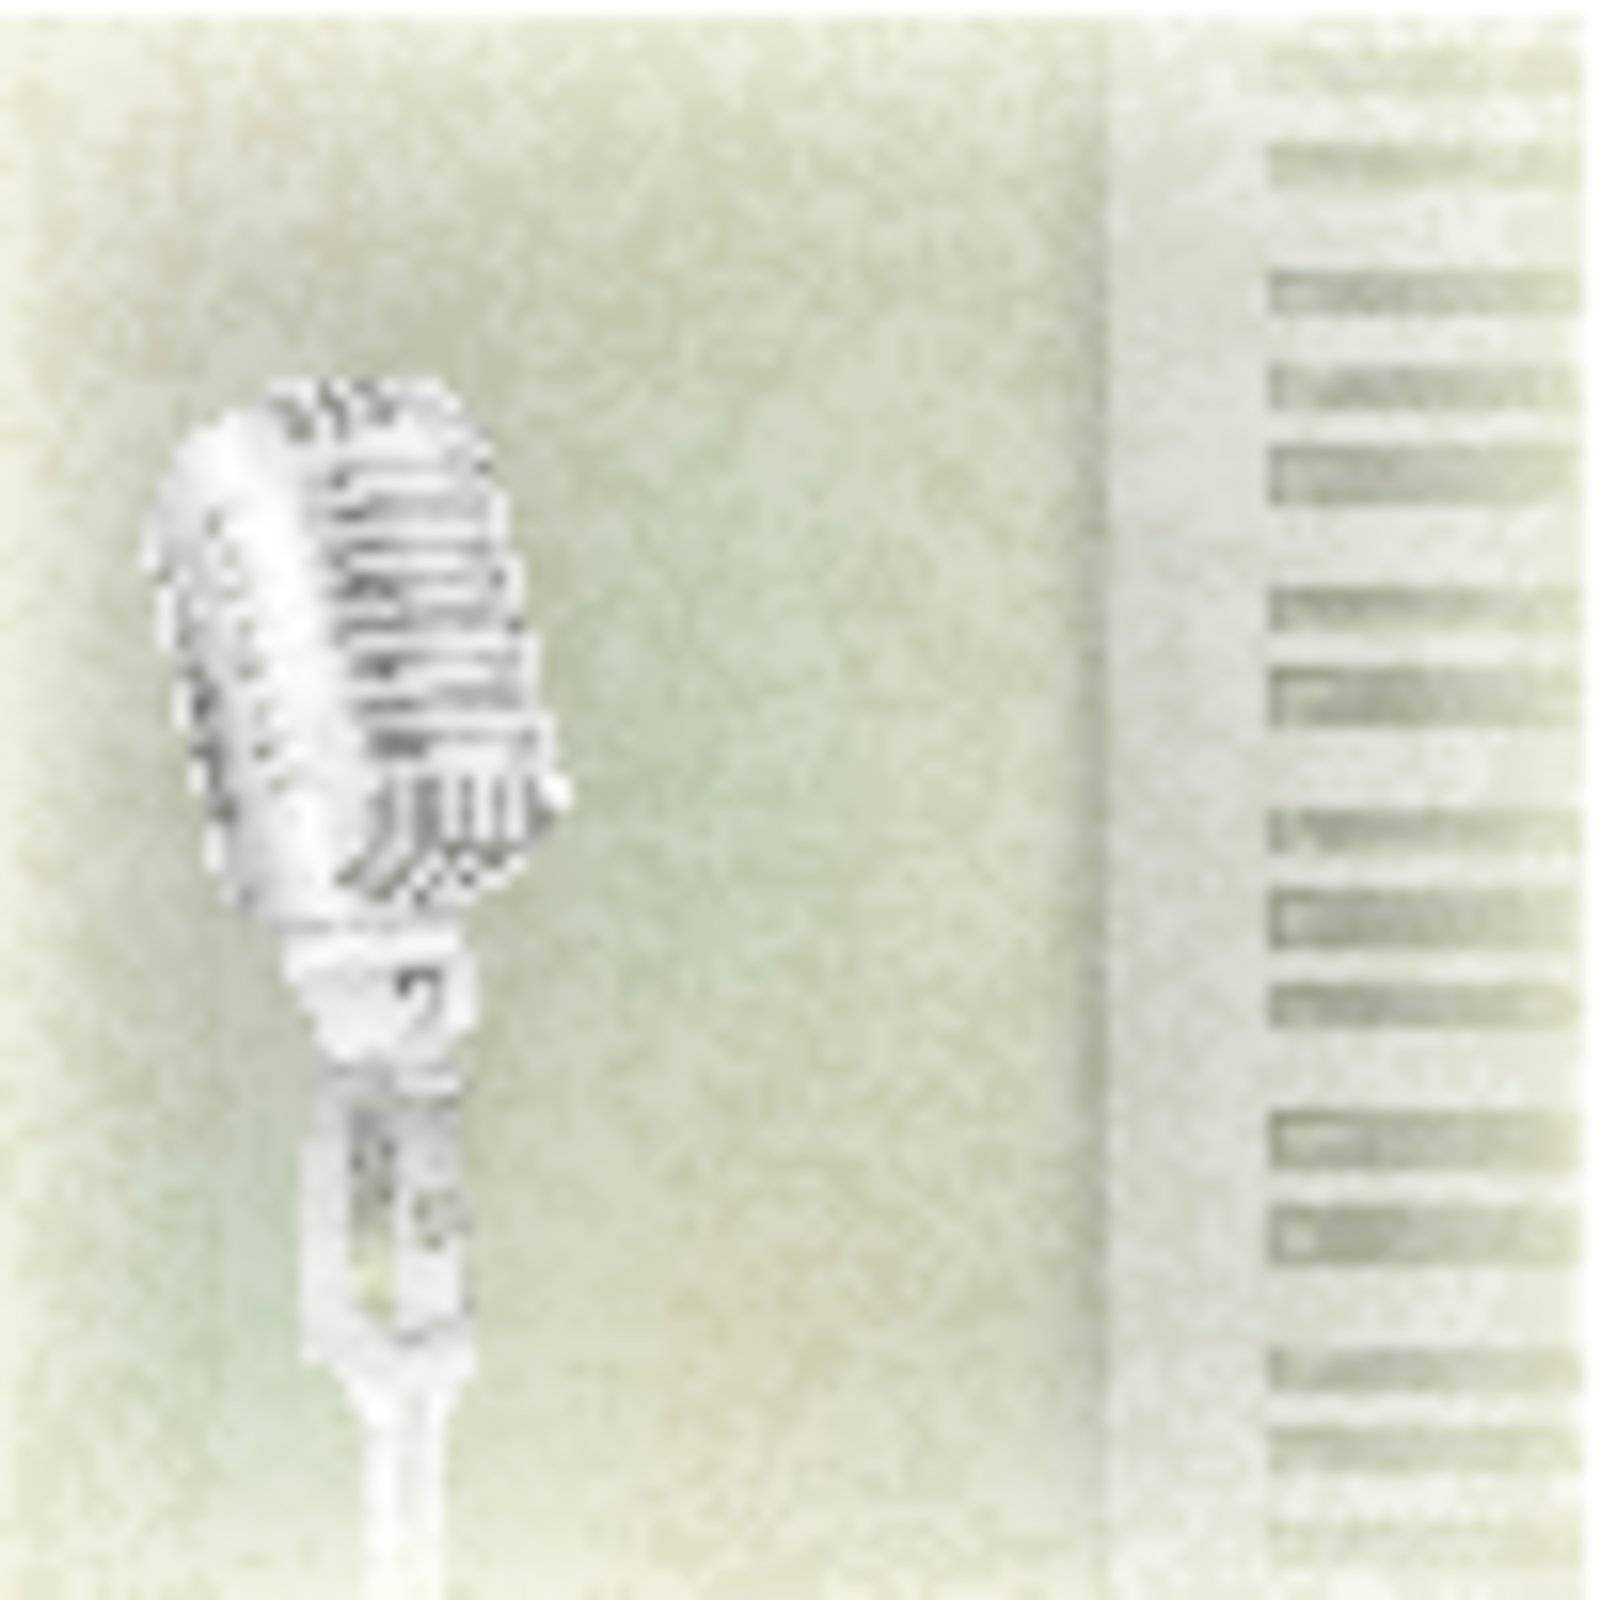 abstract grunge music background with retro microphone and piano